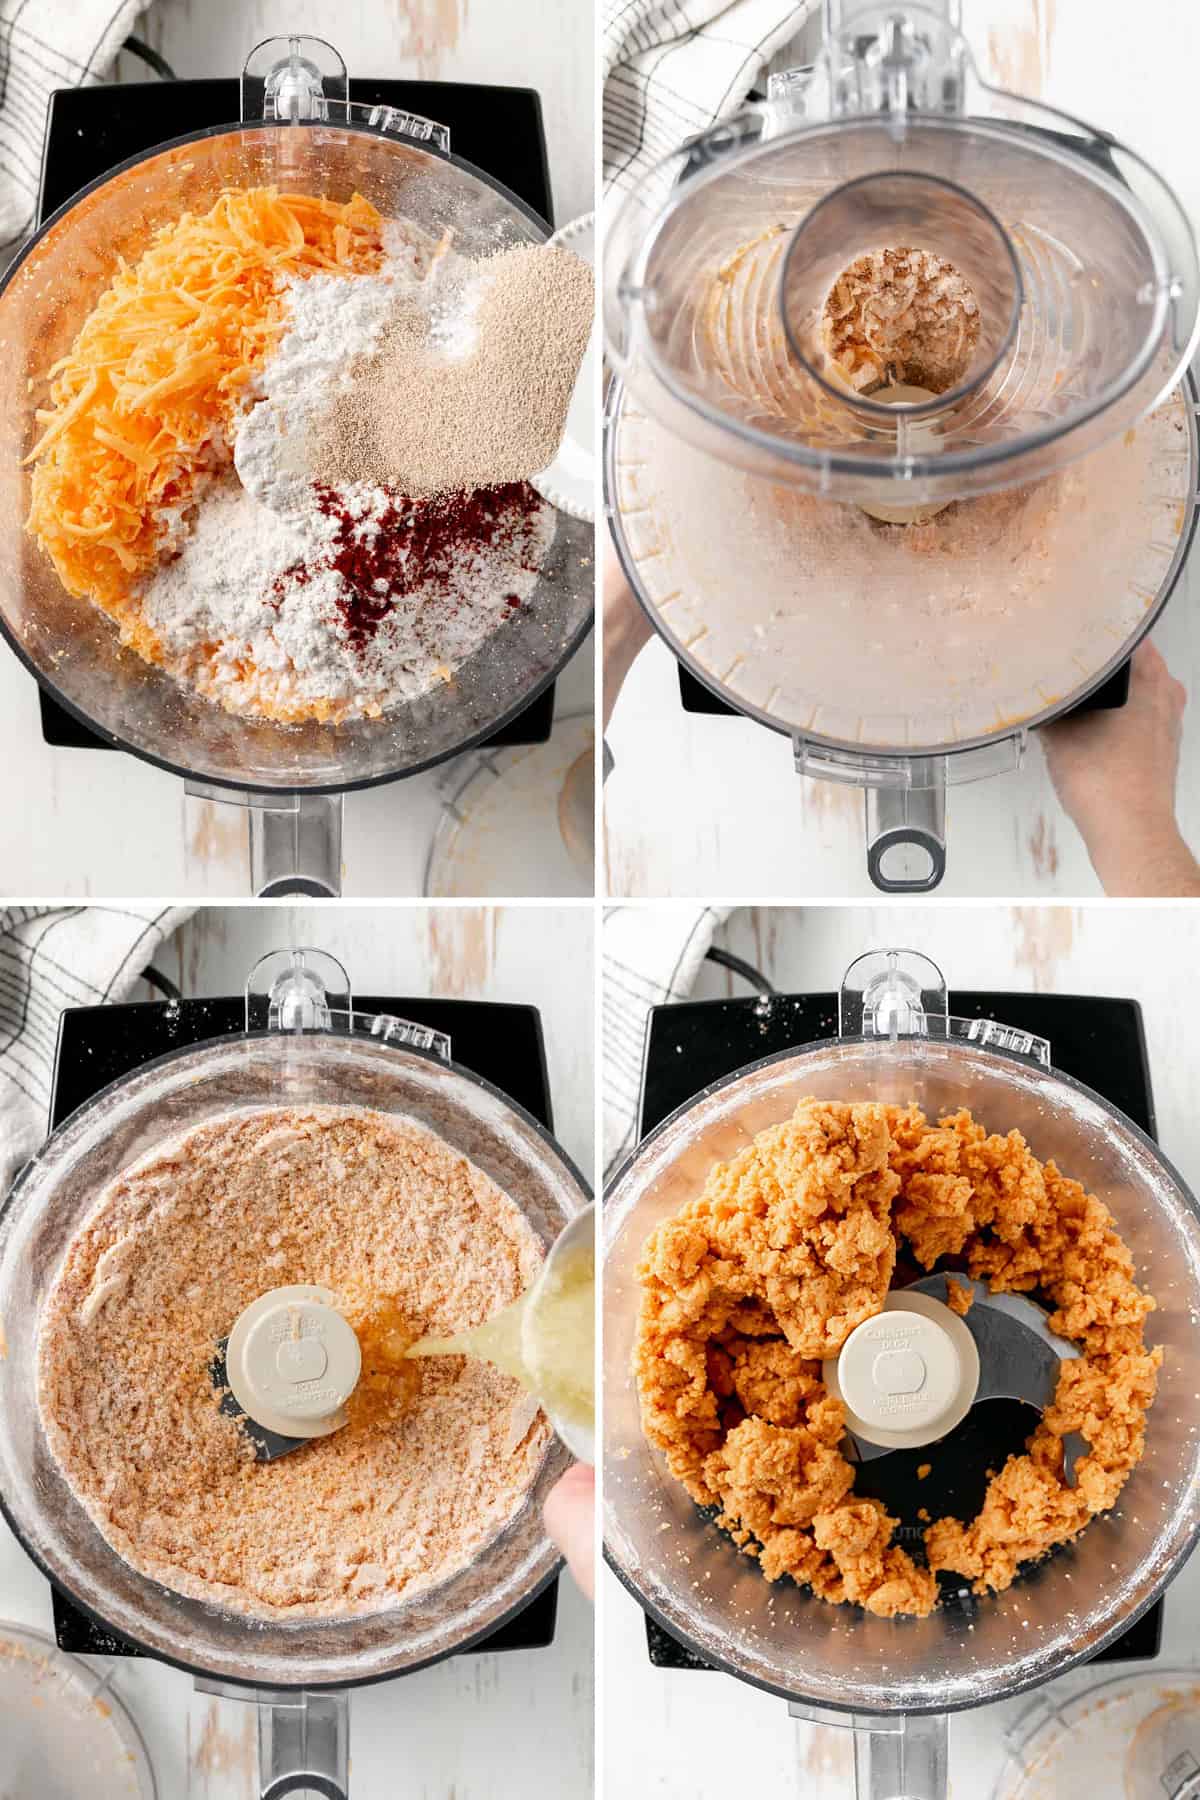 Pouring dry ingredients into the food processor along with the shredded cheese, pulsing the mixture. Adding wet ingredients and blending to combine.